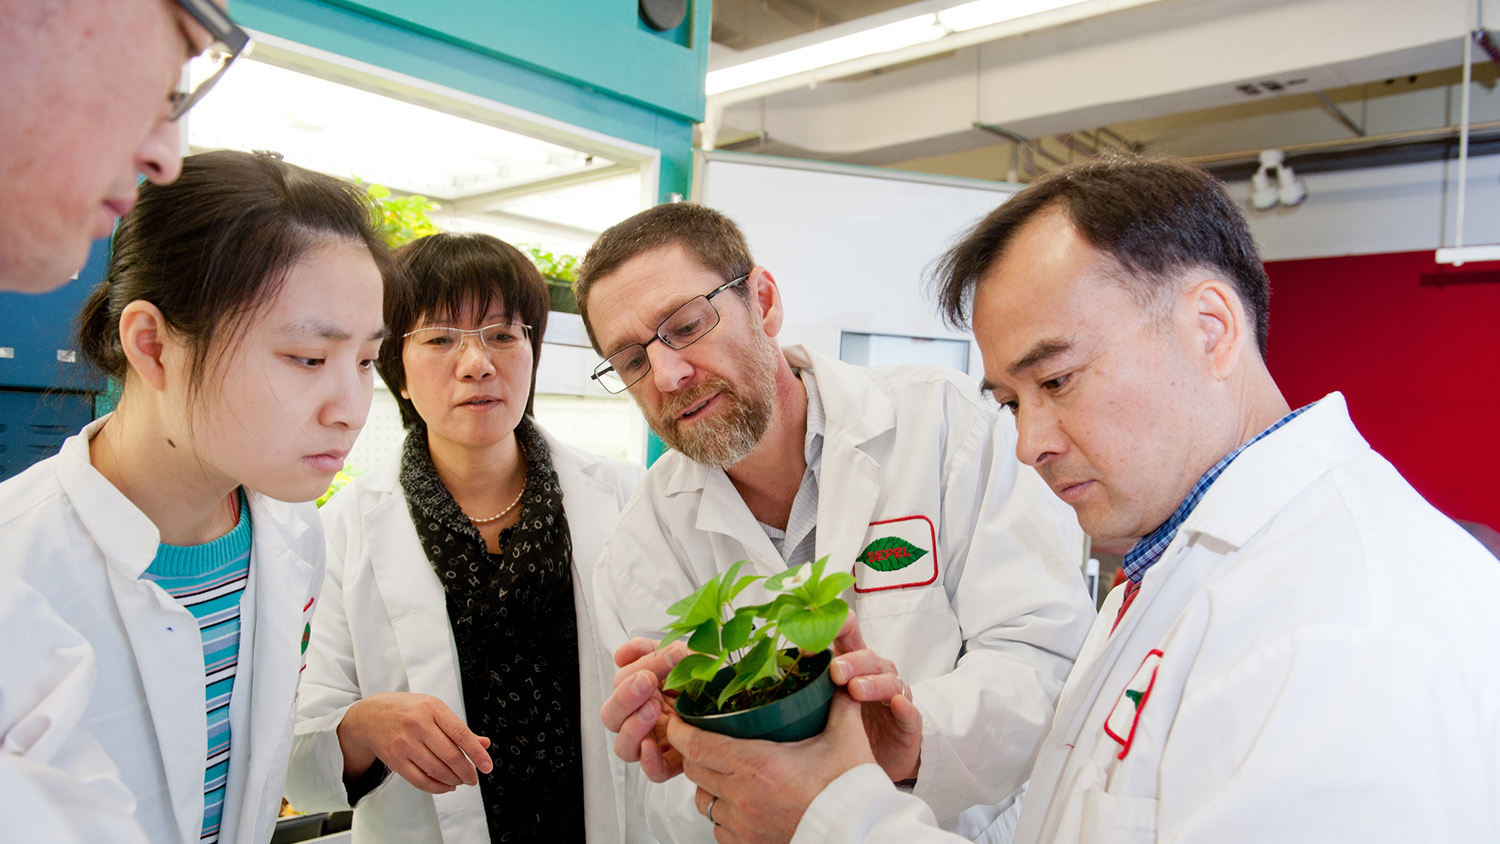 Researchers Qing Ma, Xiang Liu, Dr. Jenny Xiang, Dr. Bob Franks and Dr. Deyu Xie work with dogwood plants in the Phytotron.